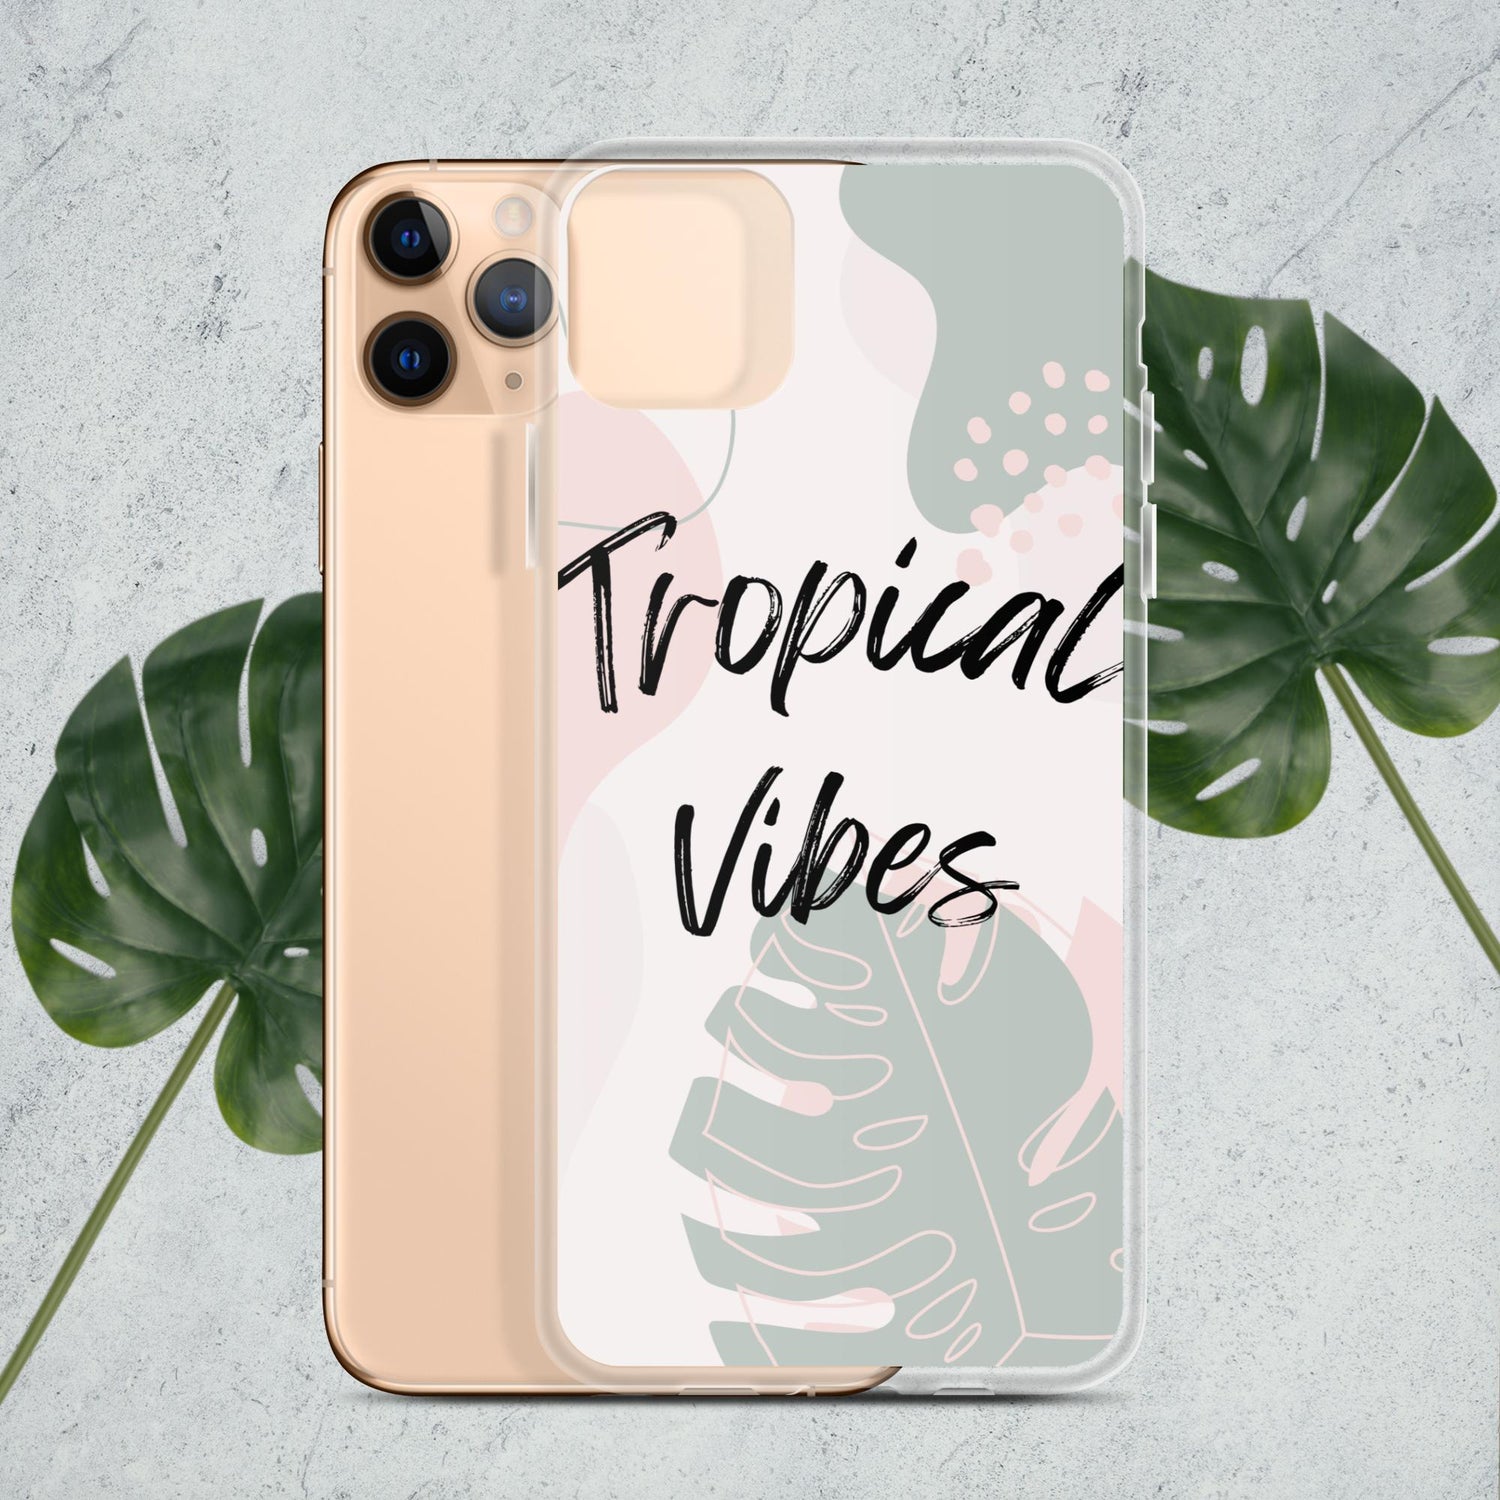 Tropical Vibes - Iphone Case